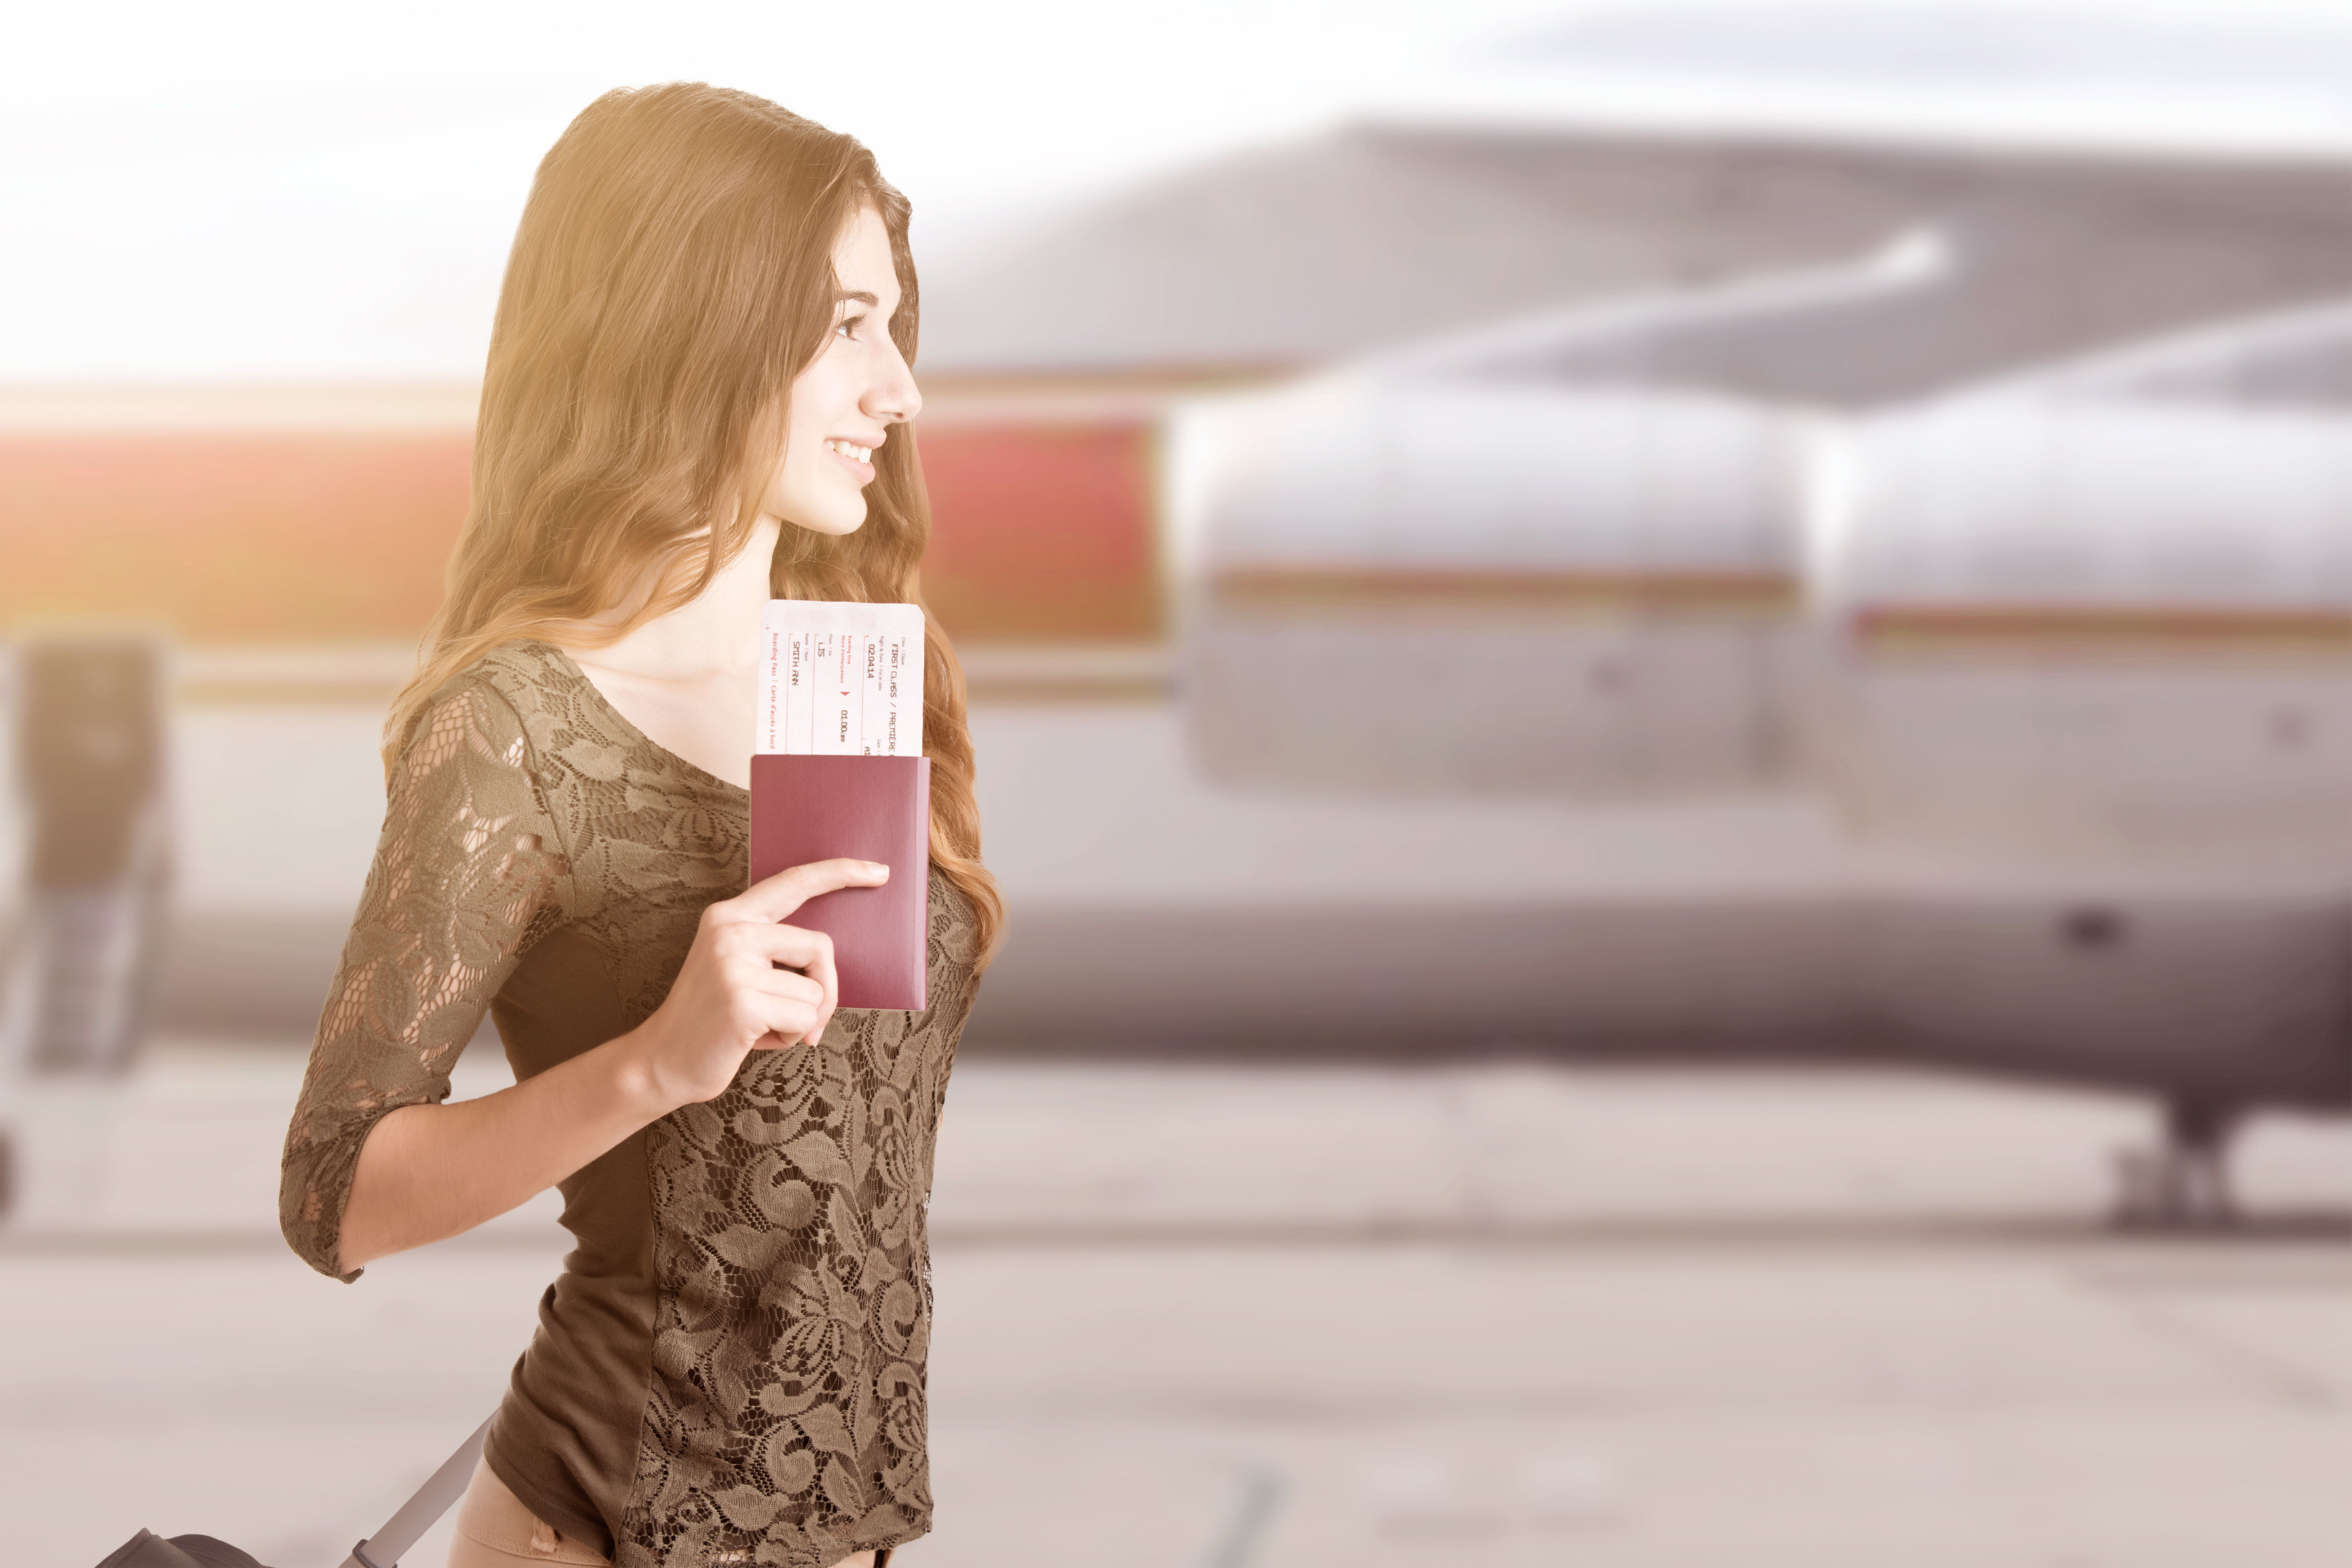 Woman about to board an airplane with passport